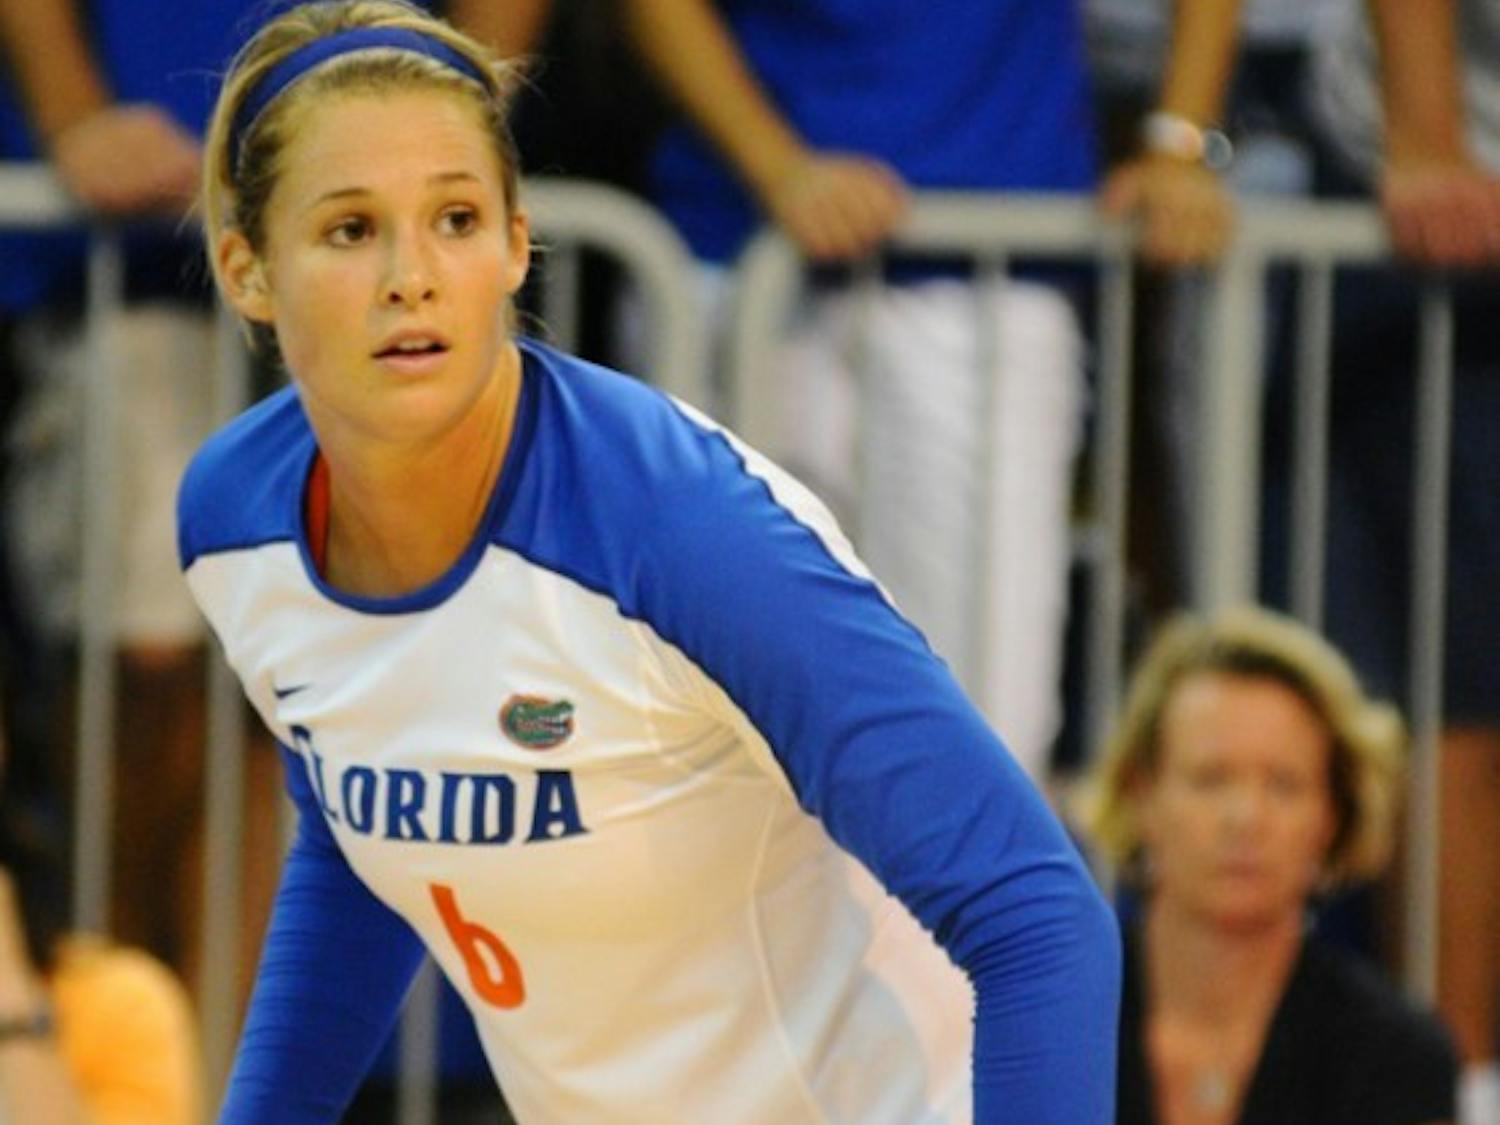 Florida senior Kristy Jaeckel is on a tear the last 13 games with 188 kills, 98 digs and a .327 hitting percentage.